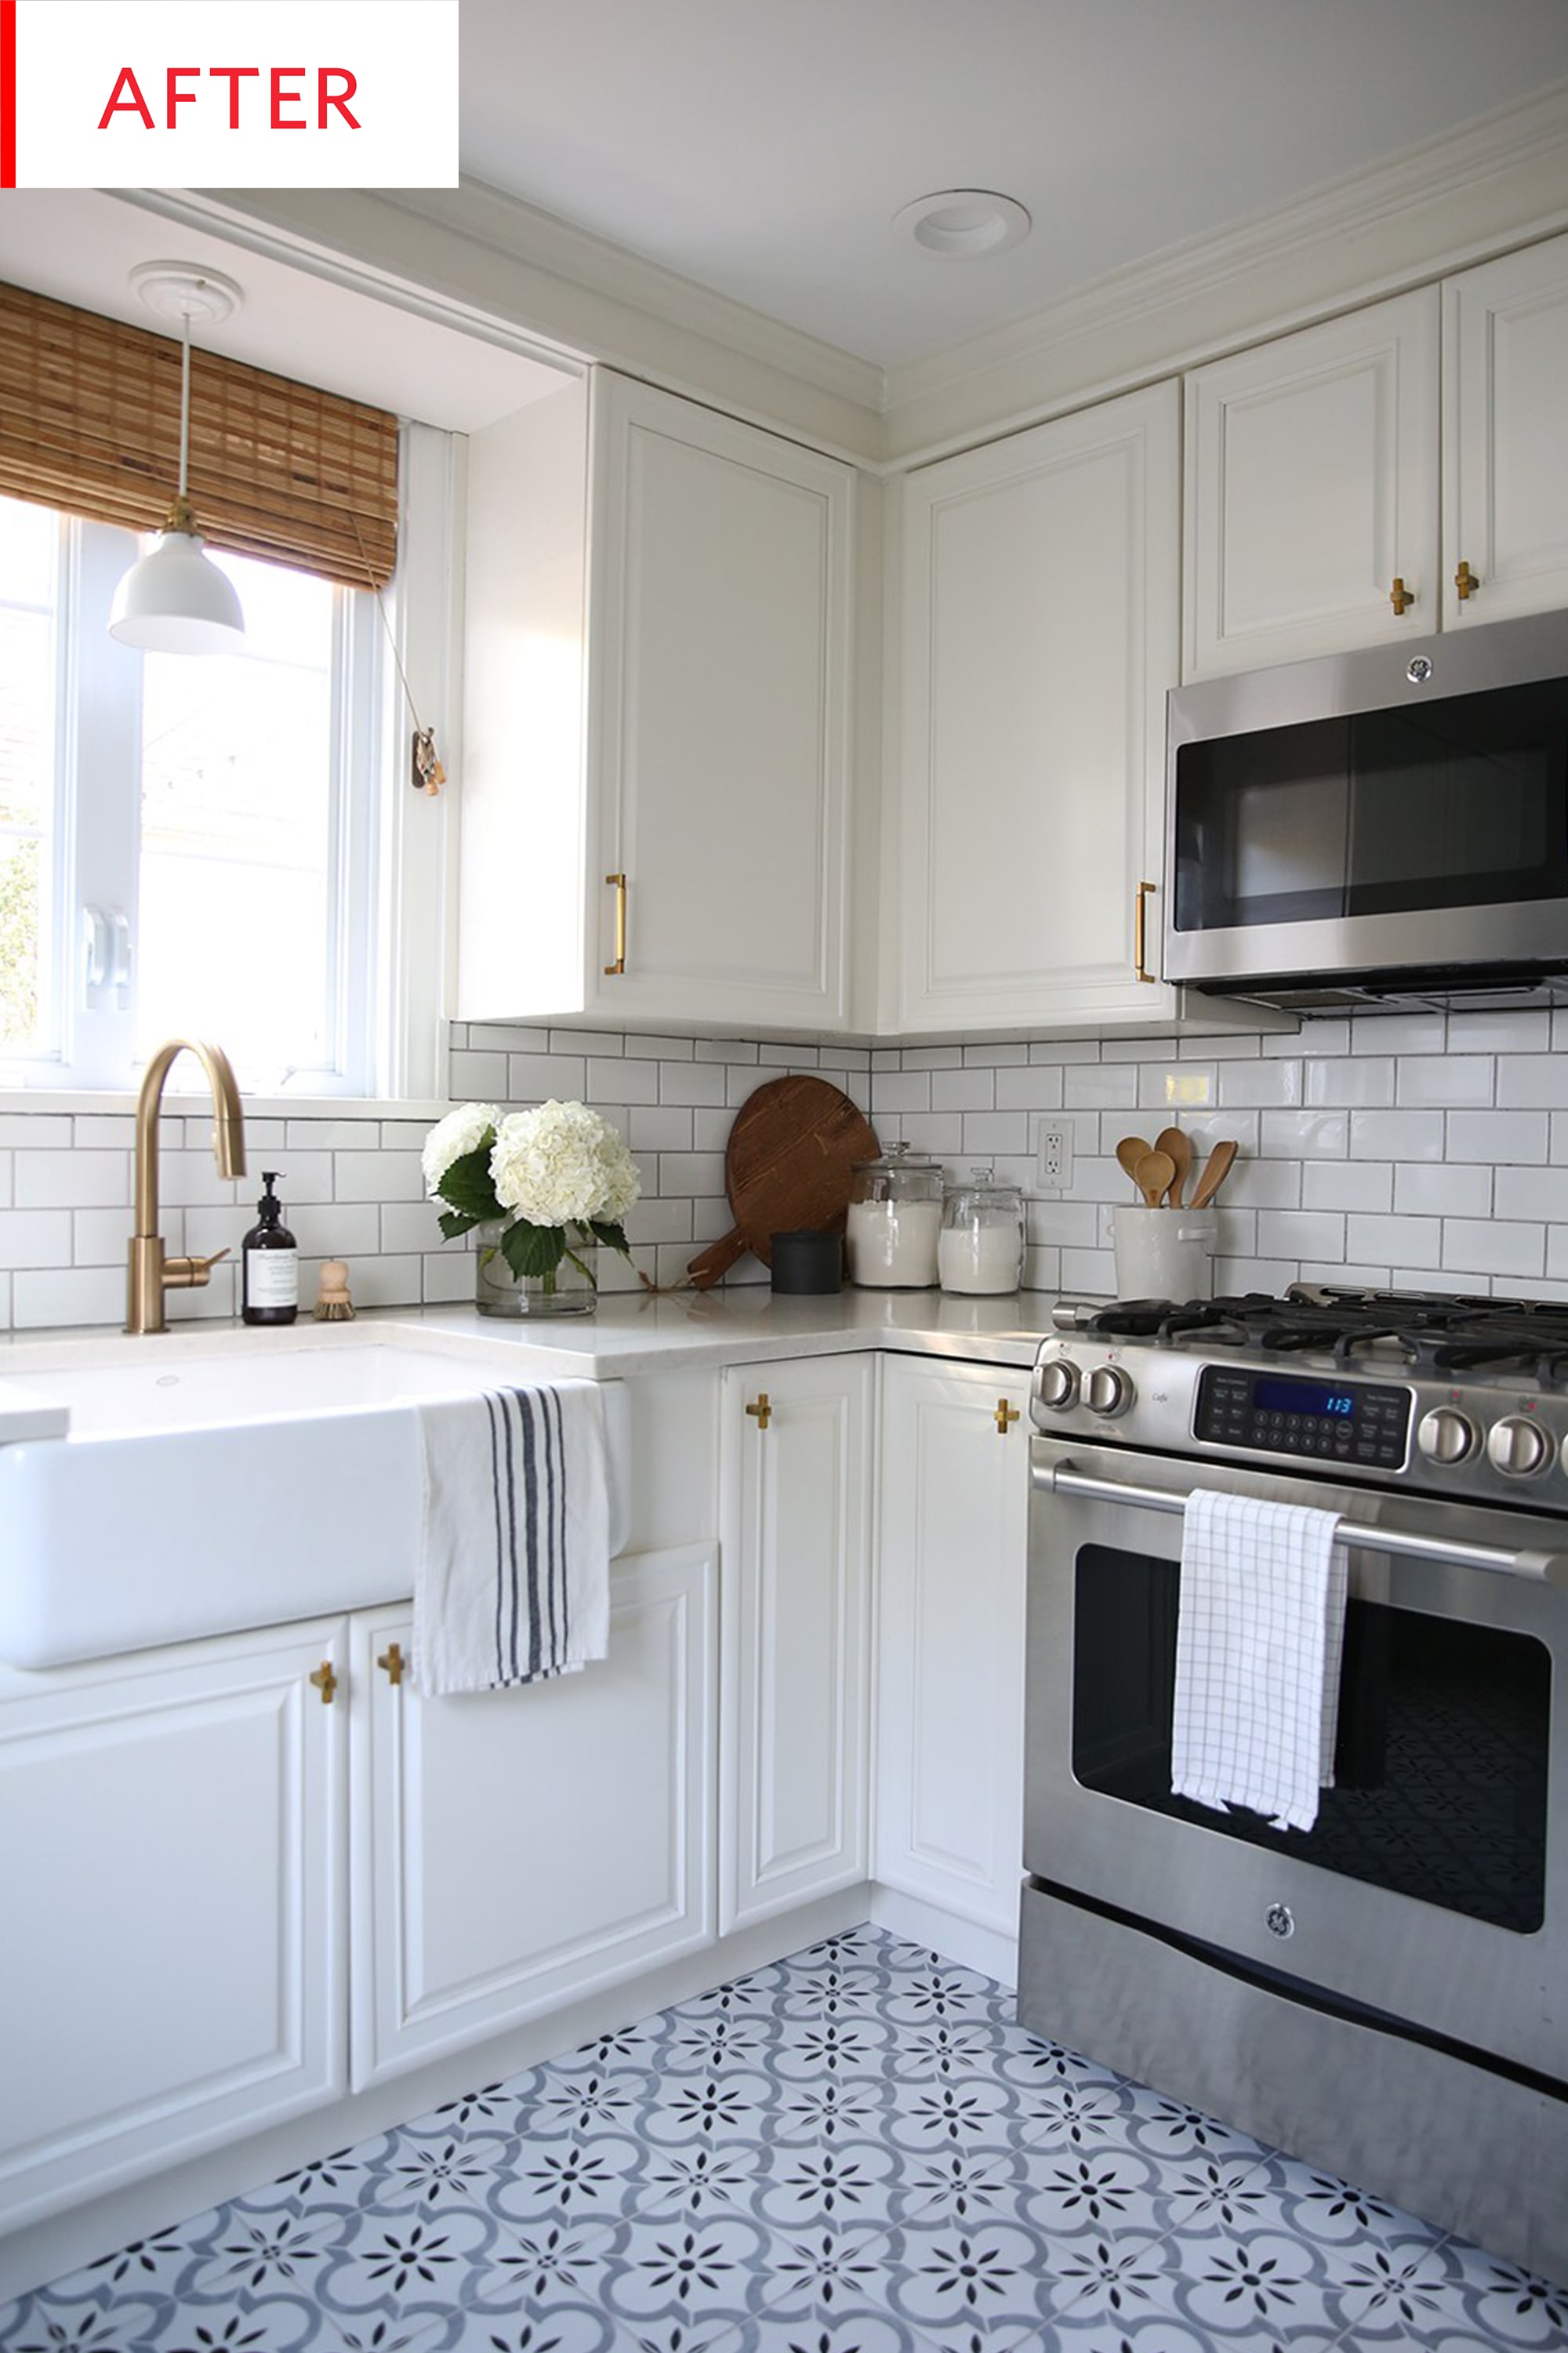 How To Redo My Kitchen Cabinets - Image to u